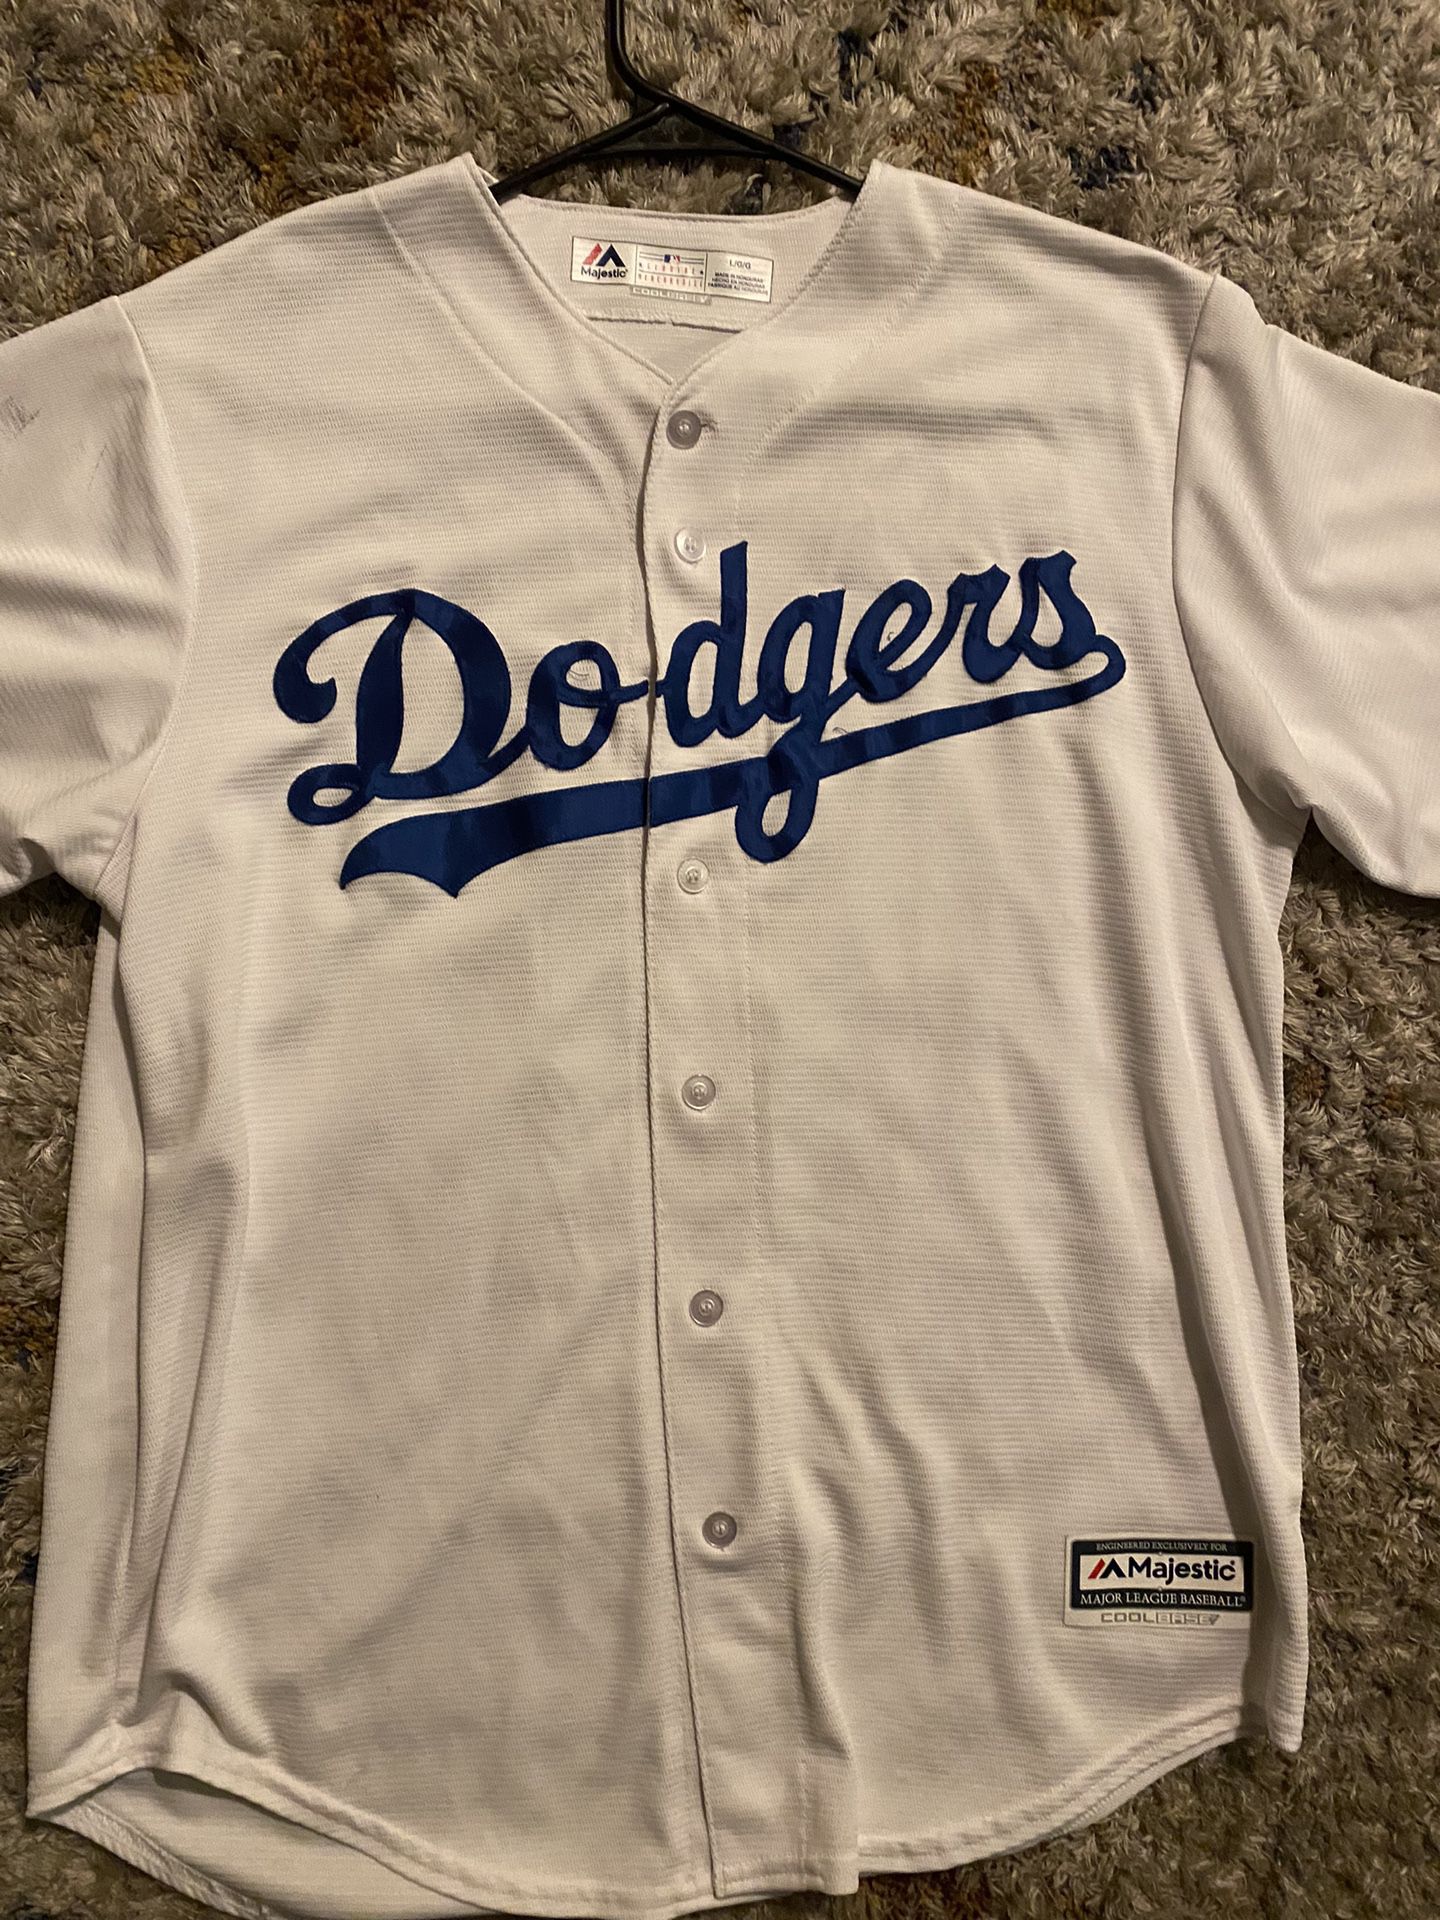 seager jersey